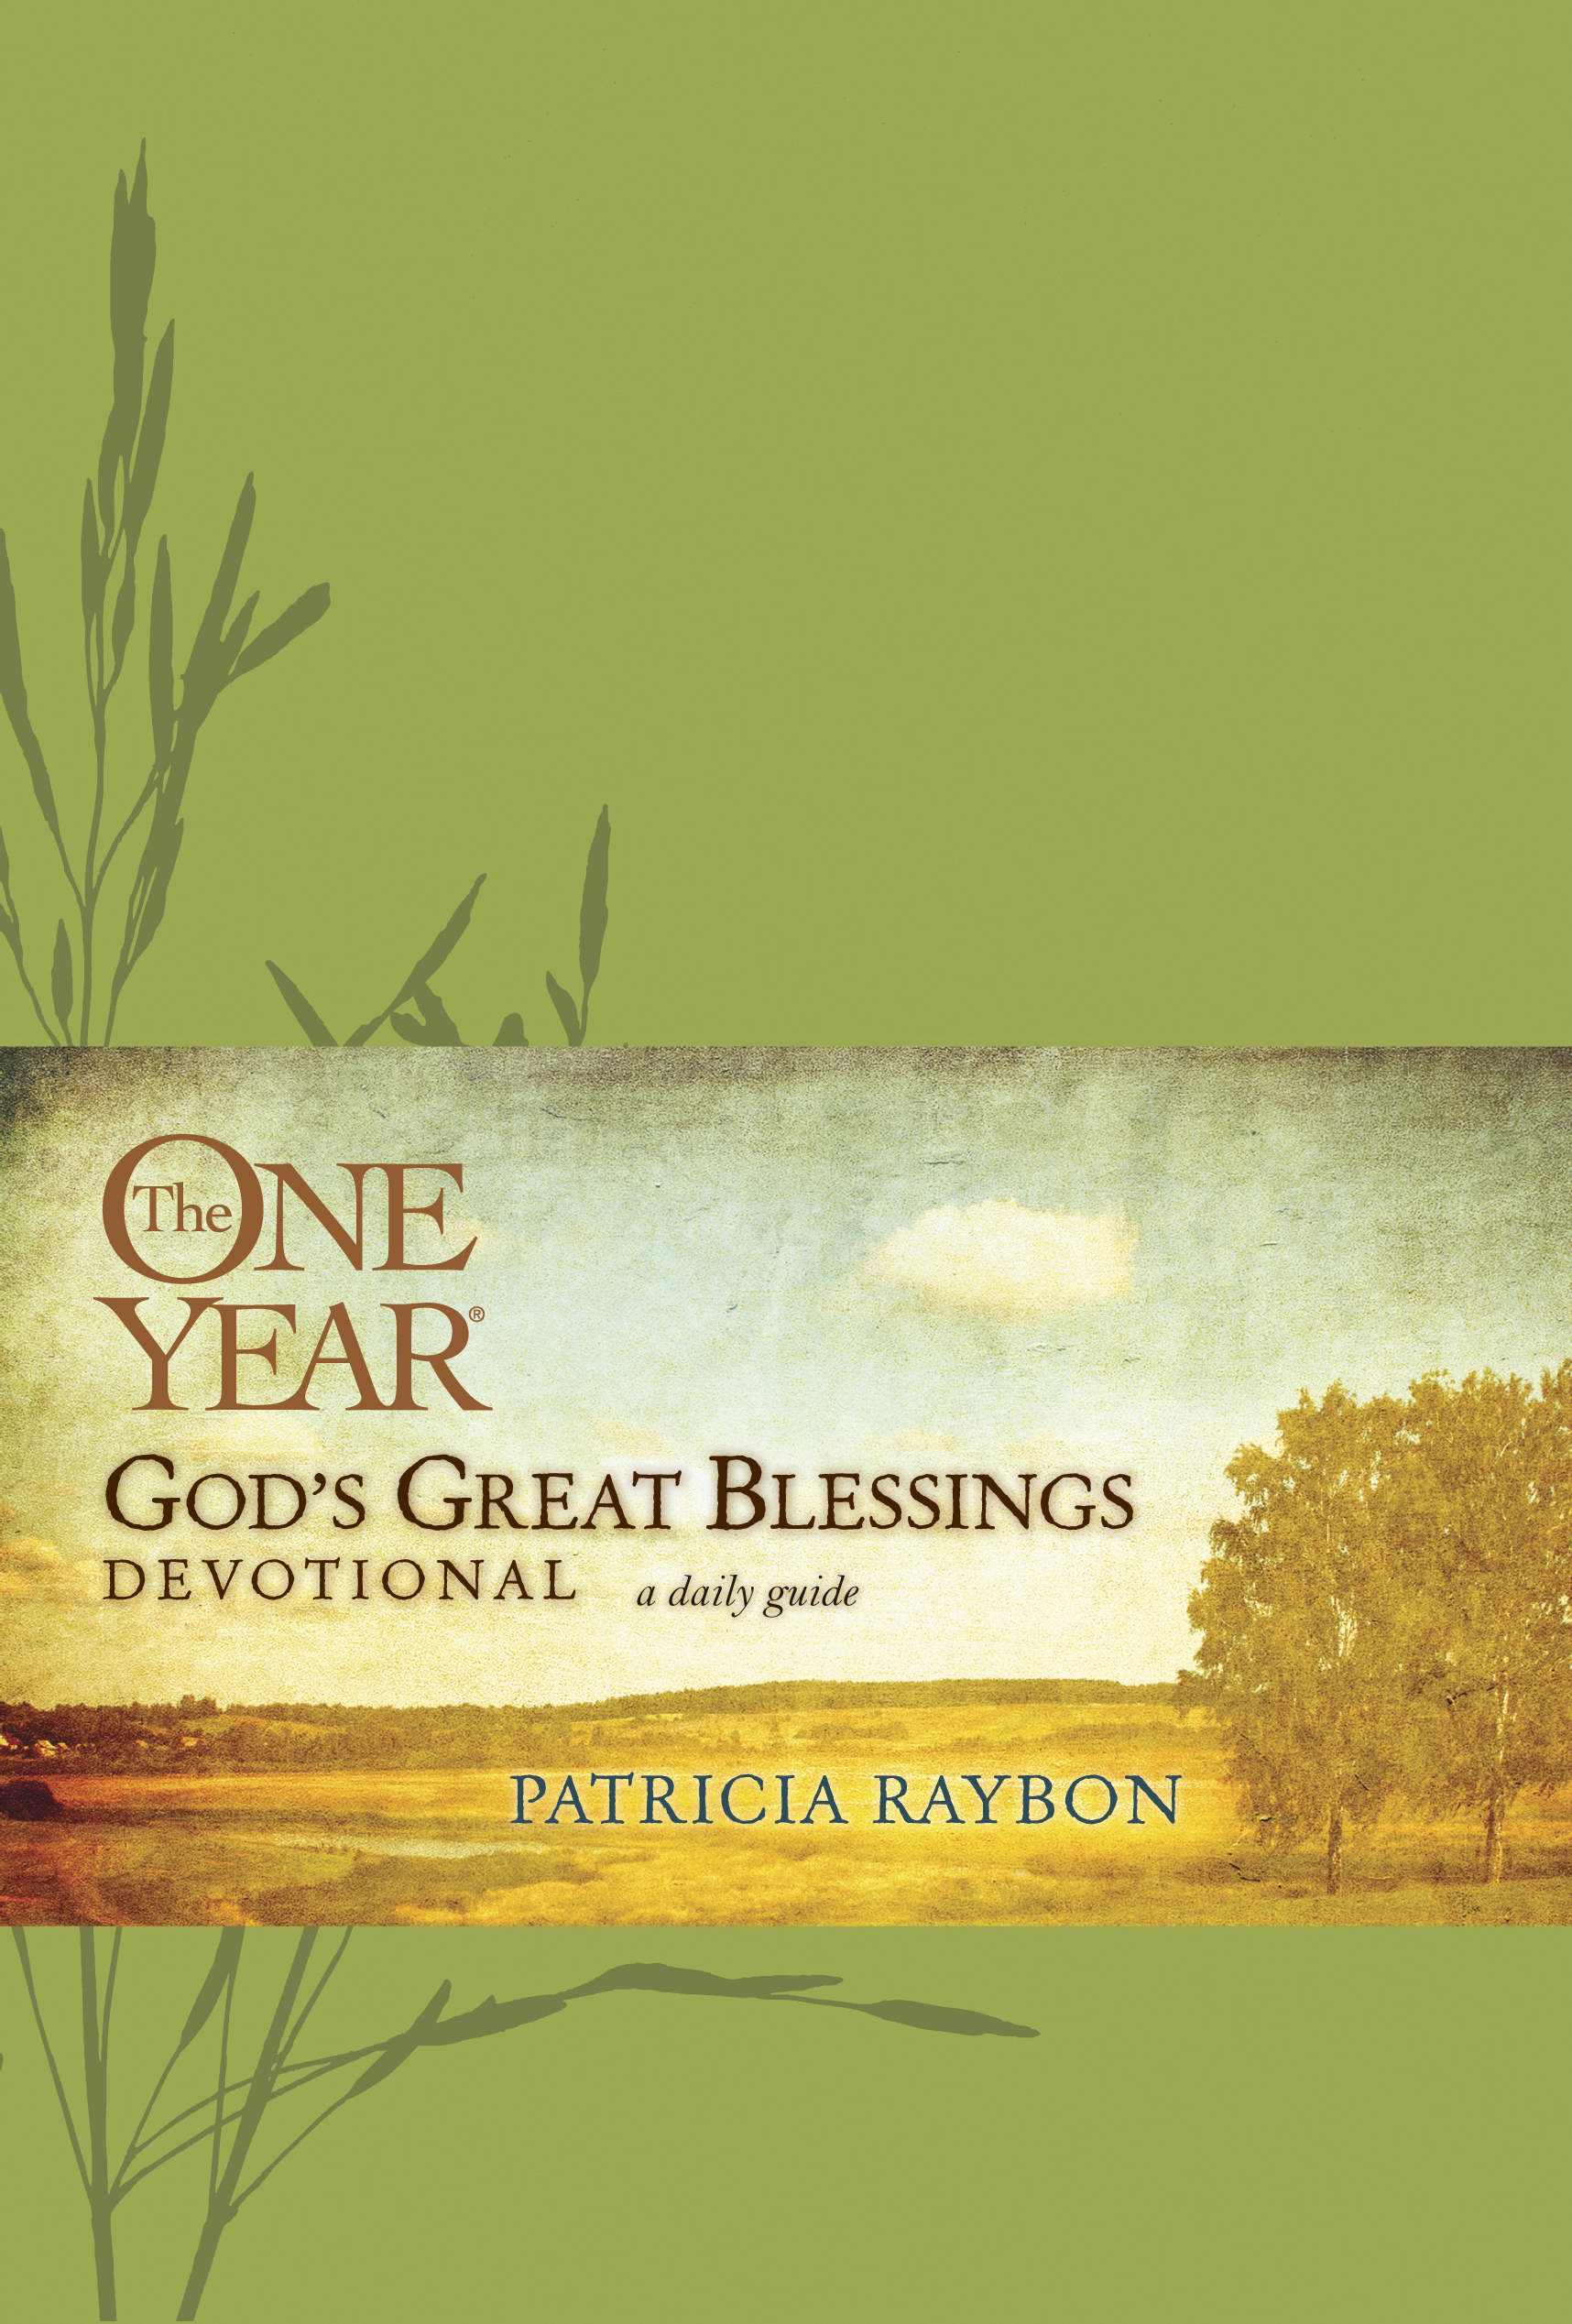 Image of One Year God's Great Blessings Devotional other